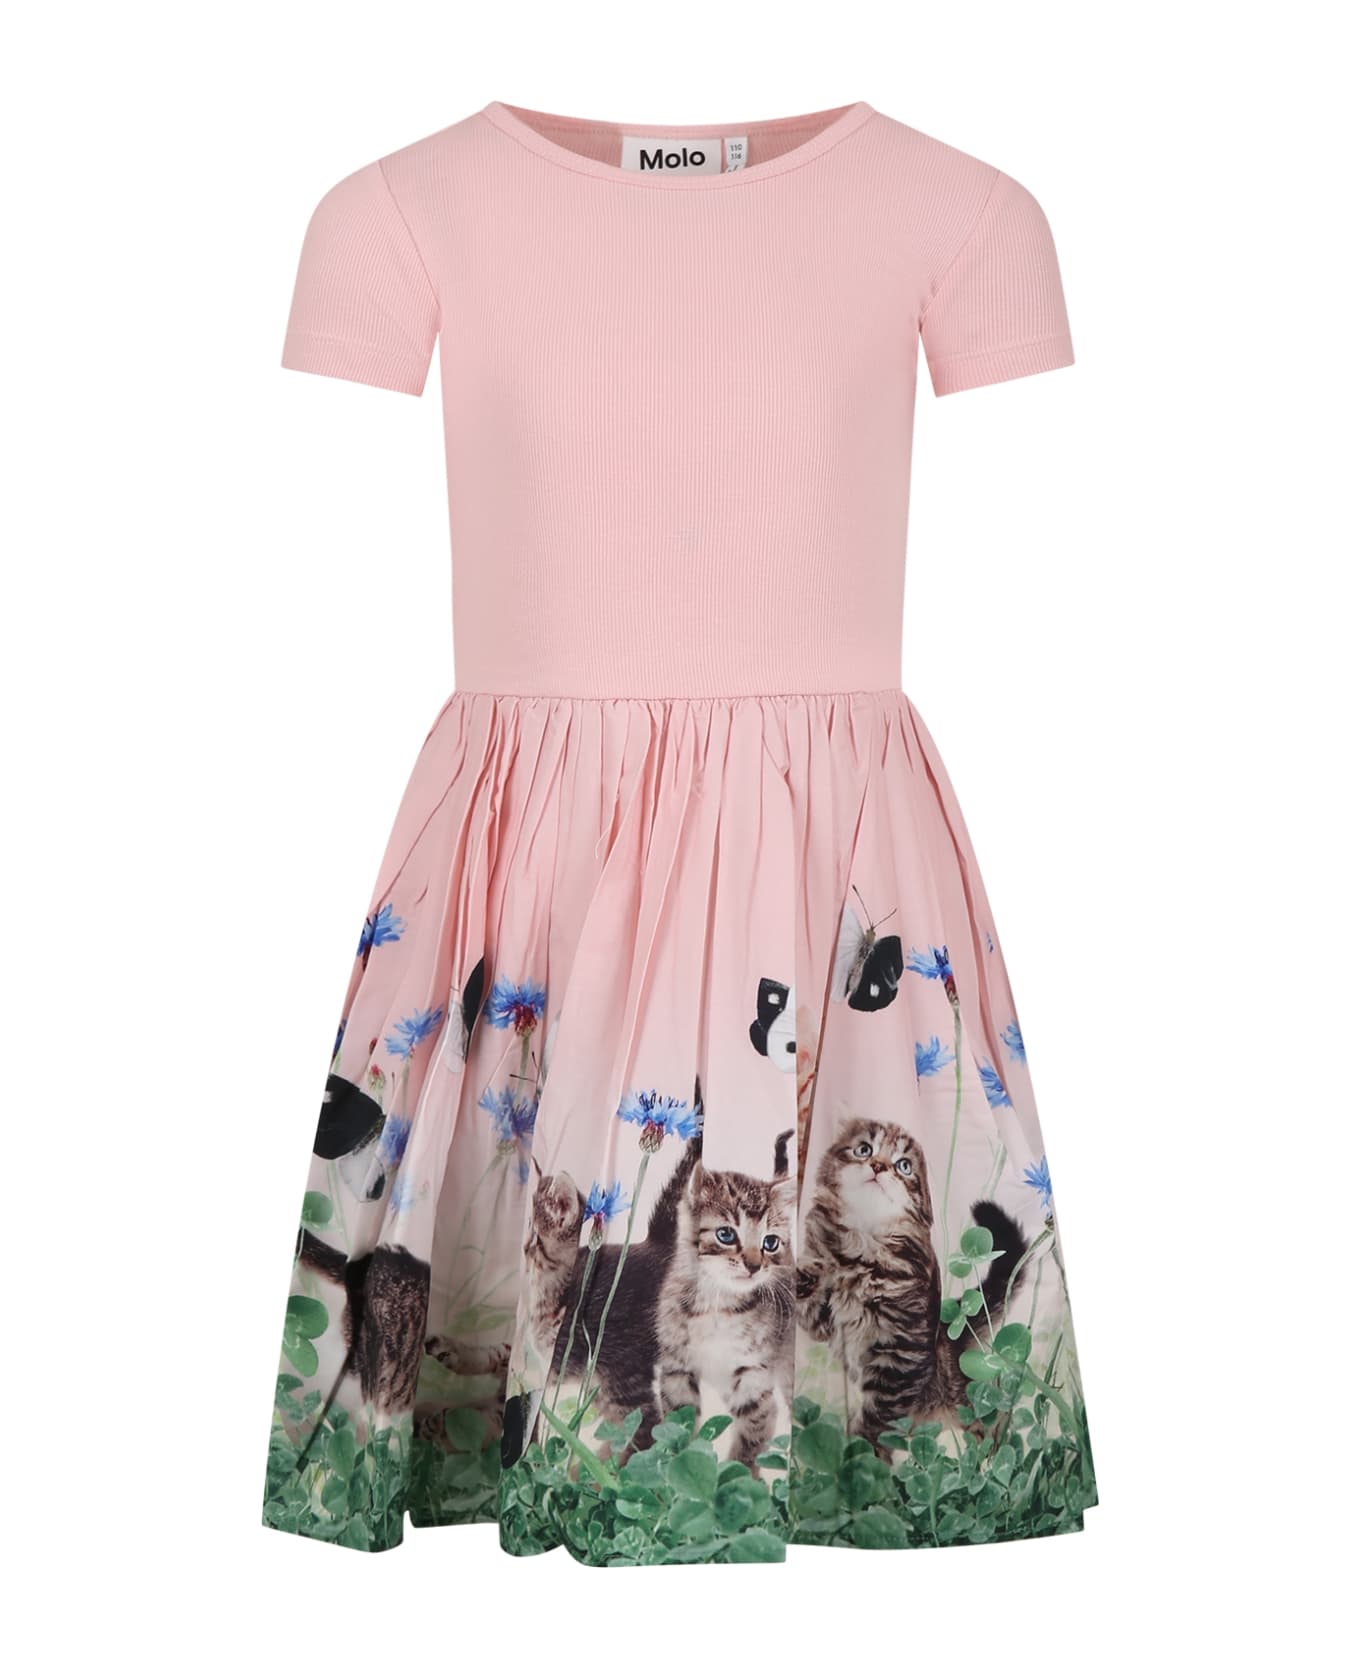 Molo Pink Dress For Girl With Cat Print - Pink ワンピース＆ドレス